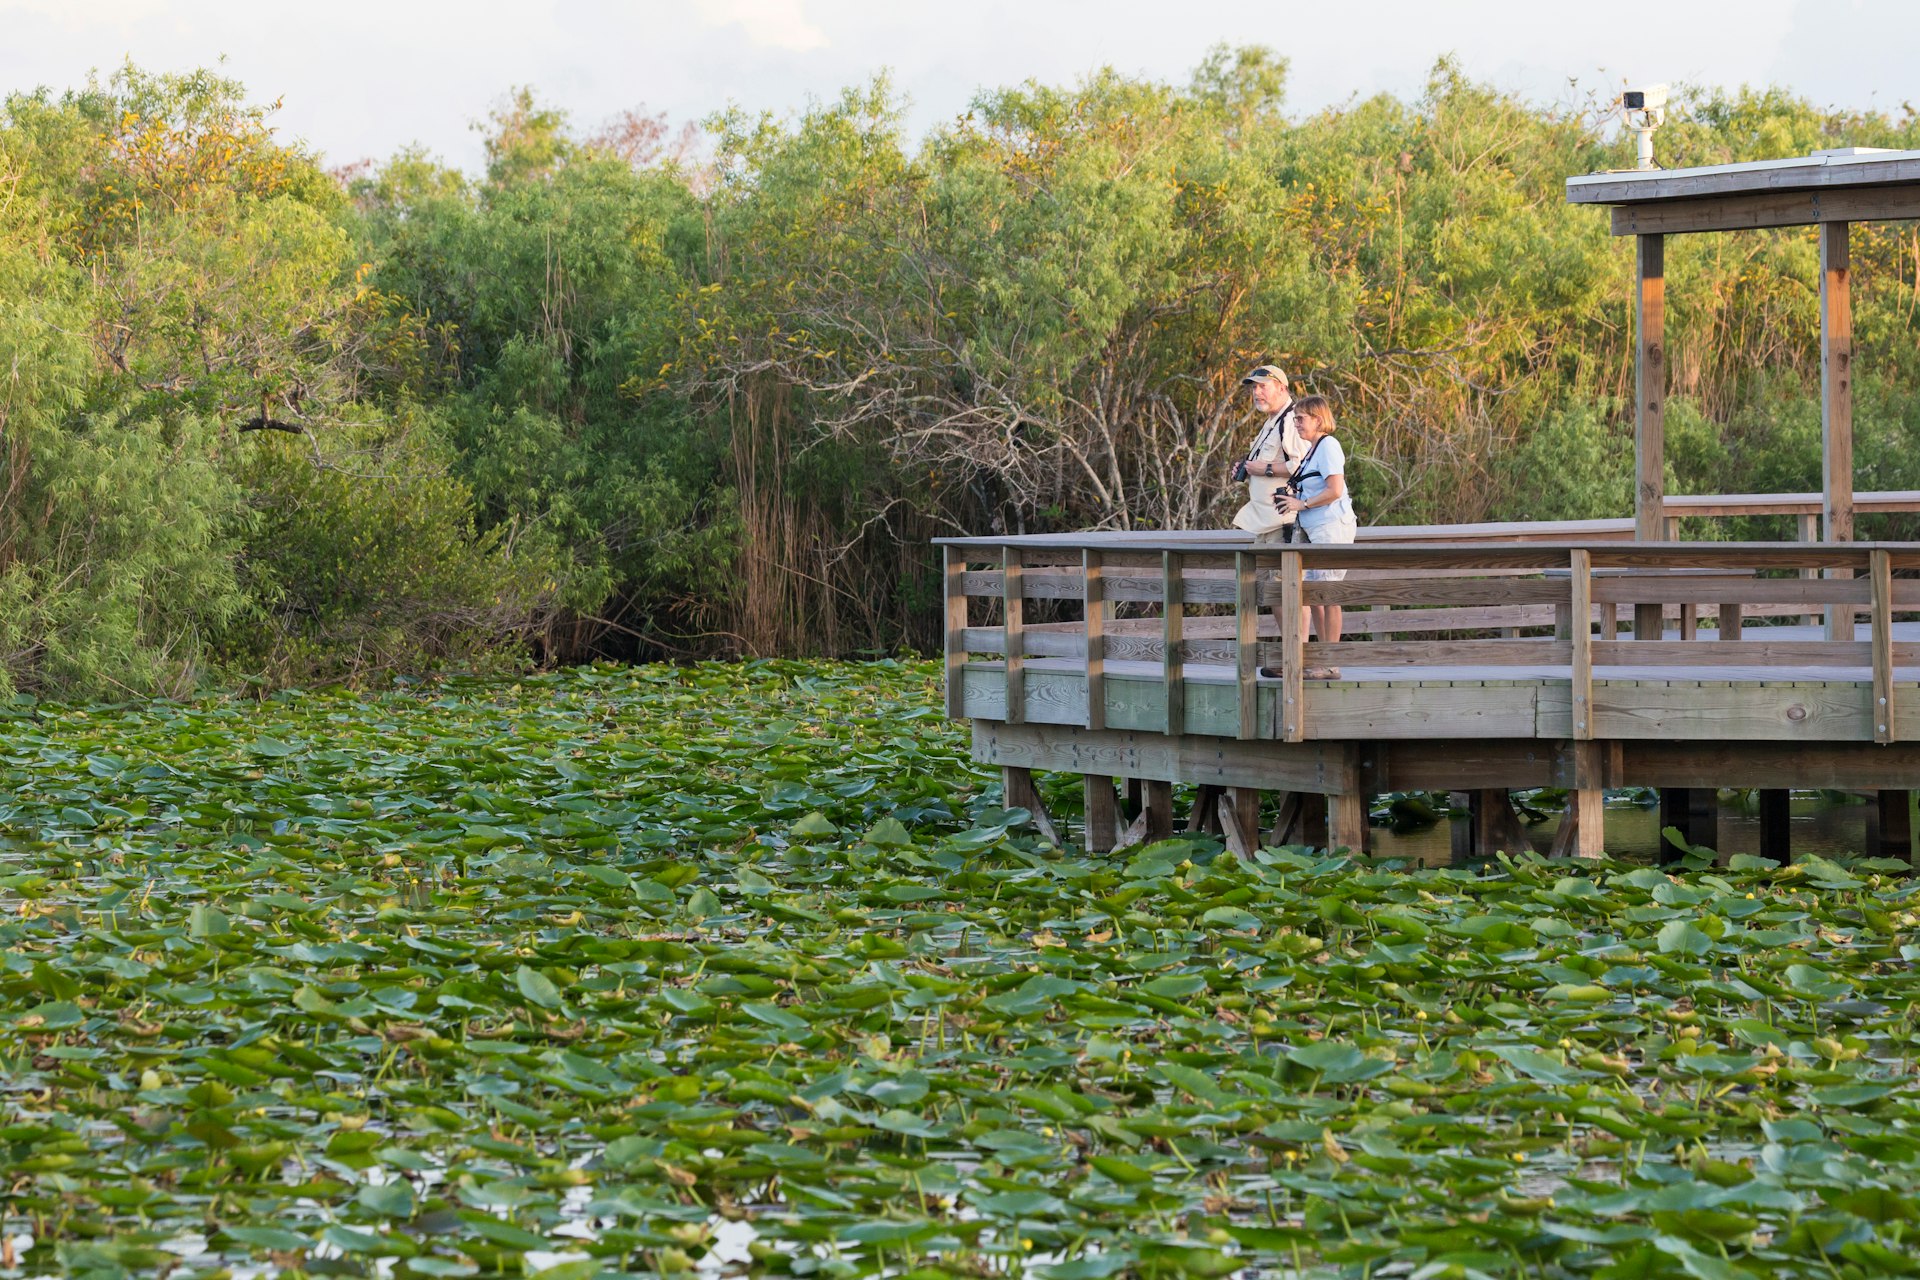 Two people stand on a boardwalk looking out over a body of water filled with lily pads and surrounded by tall grass